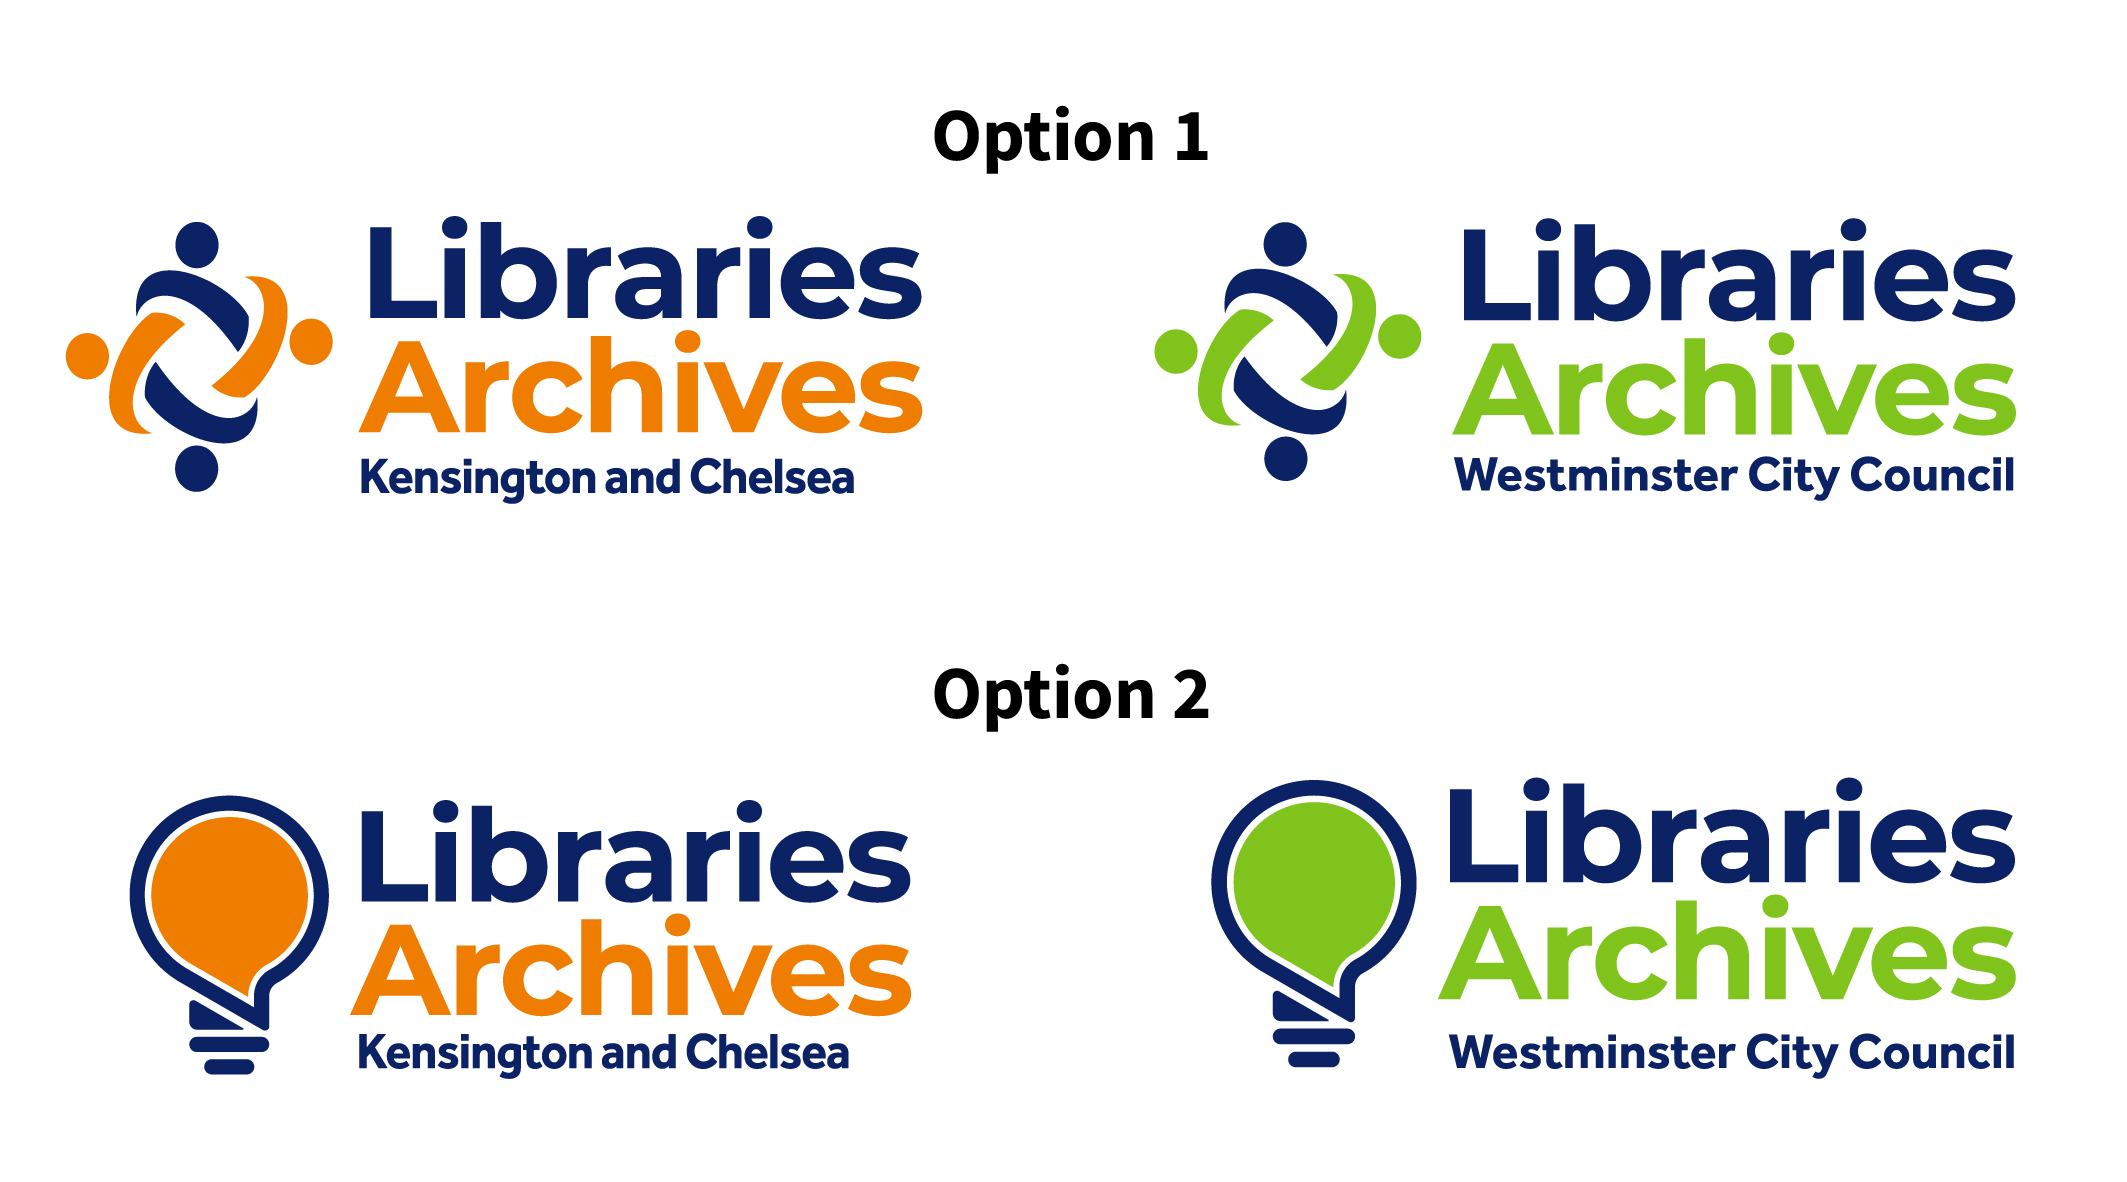 The image shows the two logo options for the libraries identity refresh. In both options, Kensington and Chelsea libraries will be in orange and Westminster libraries will be in green. In option one, a community circle icon is used as the visual next to 'Libraries Archives', in option two, a lightbulb icon is used. 